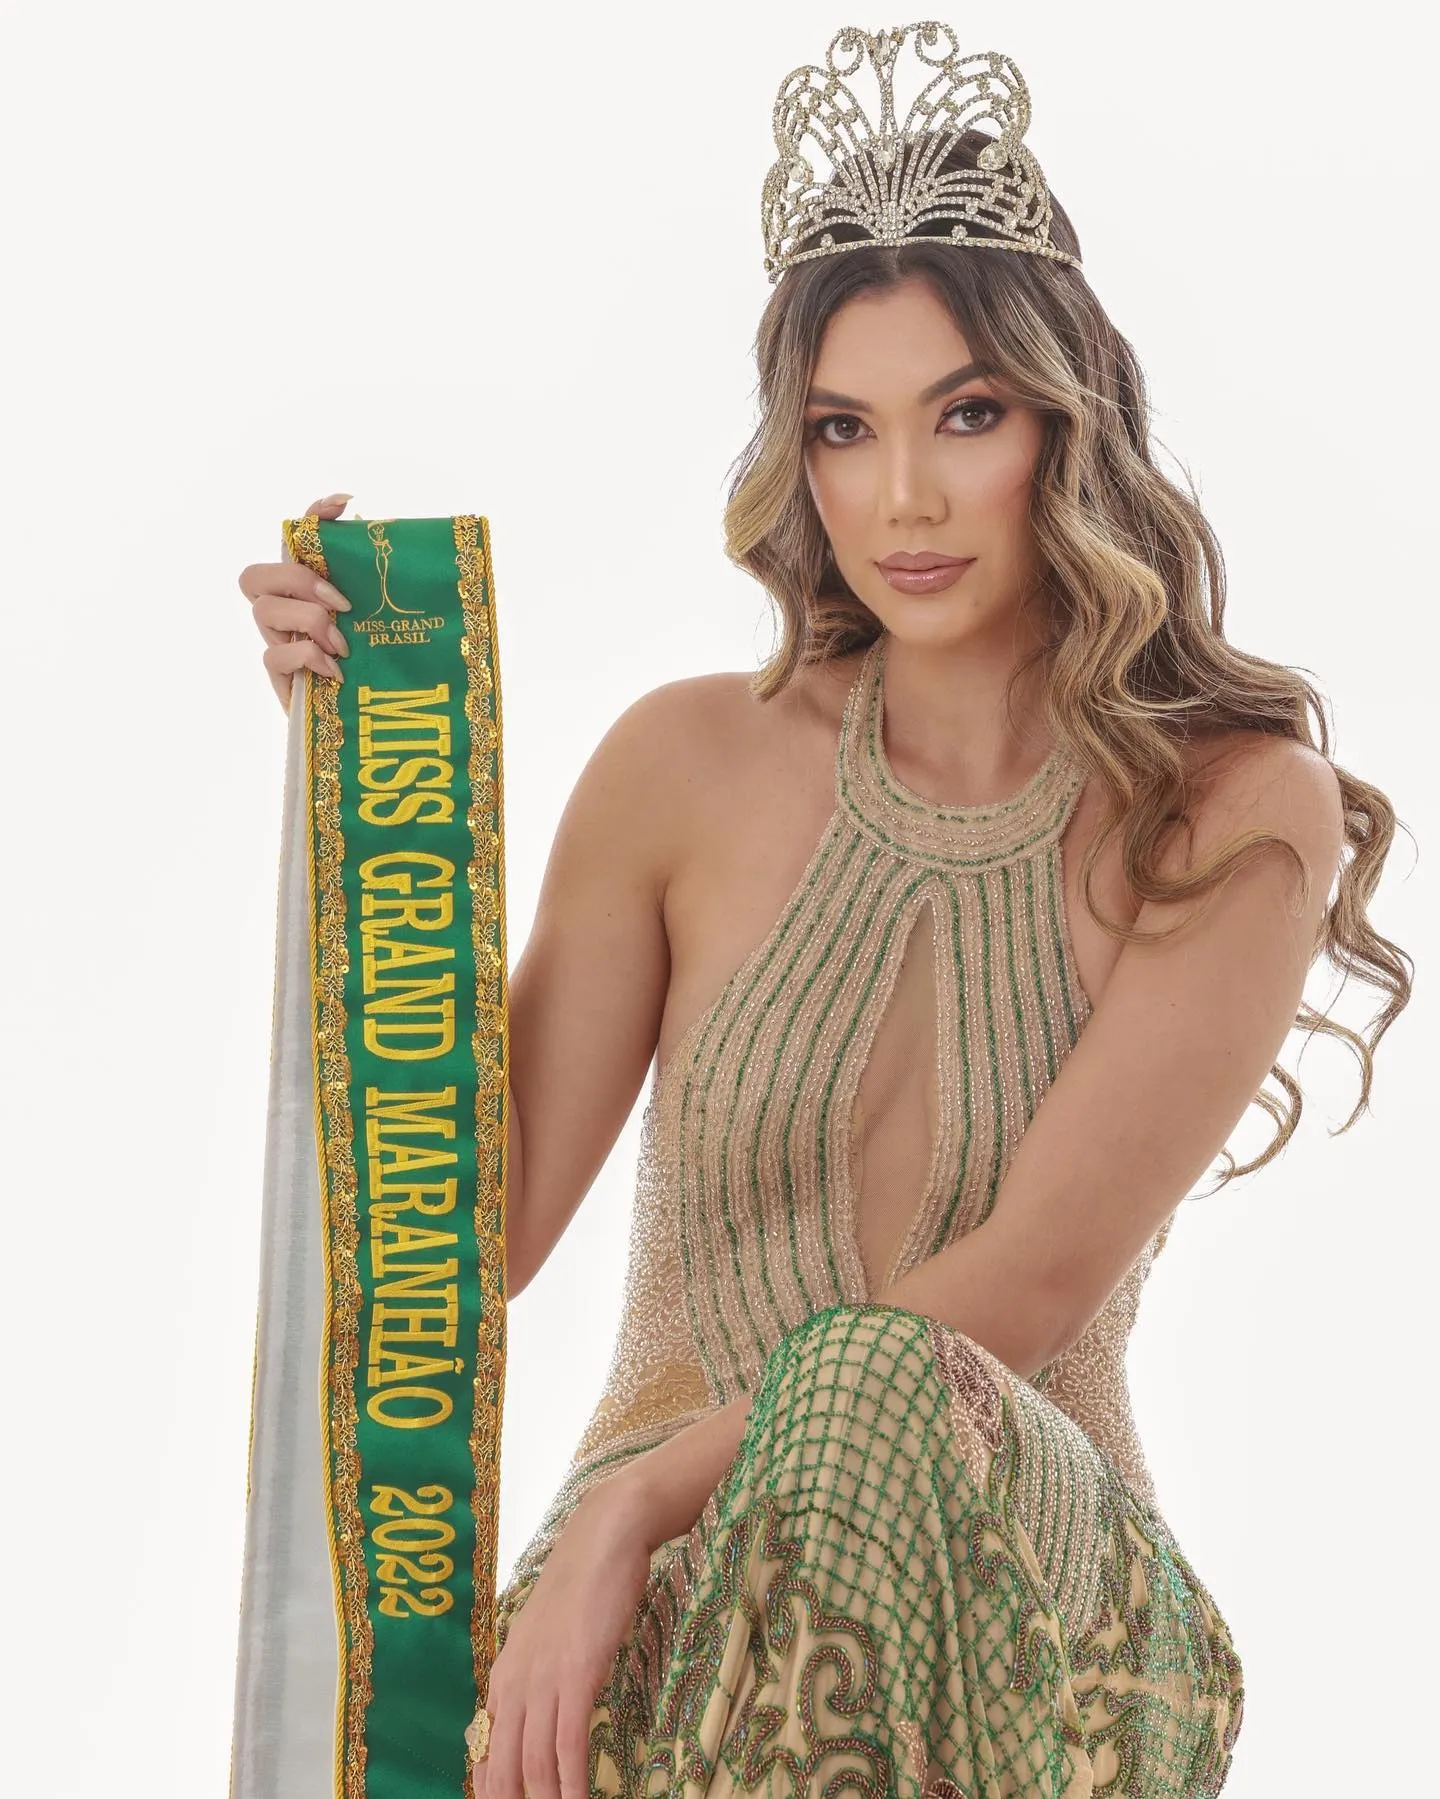 candidatas a miss grand brasil 2022. final: 28 july. HTR6s1